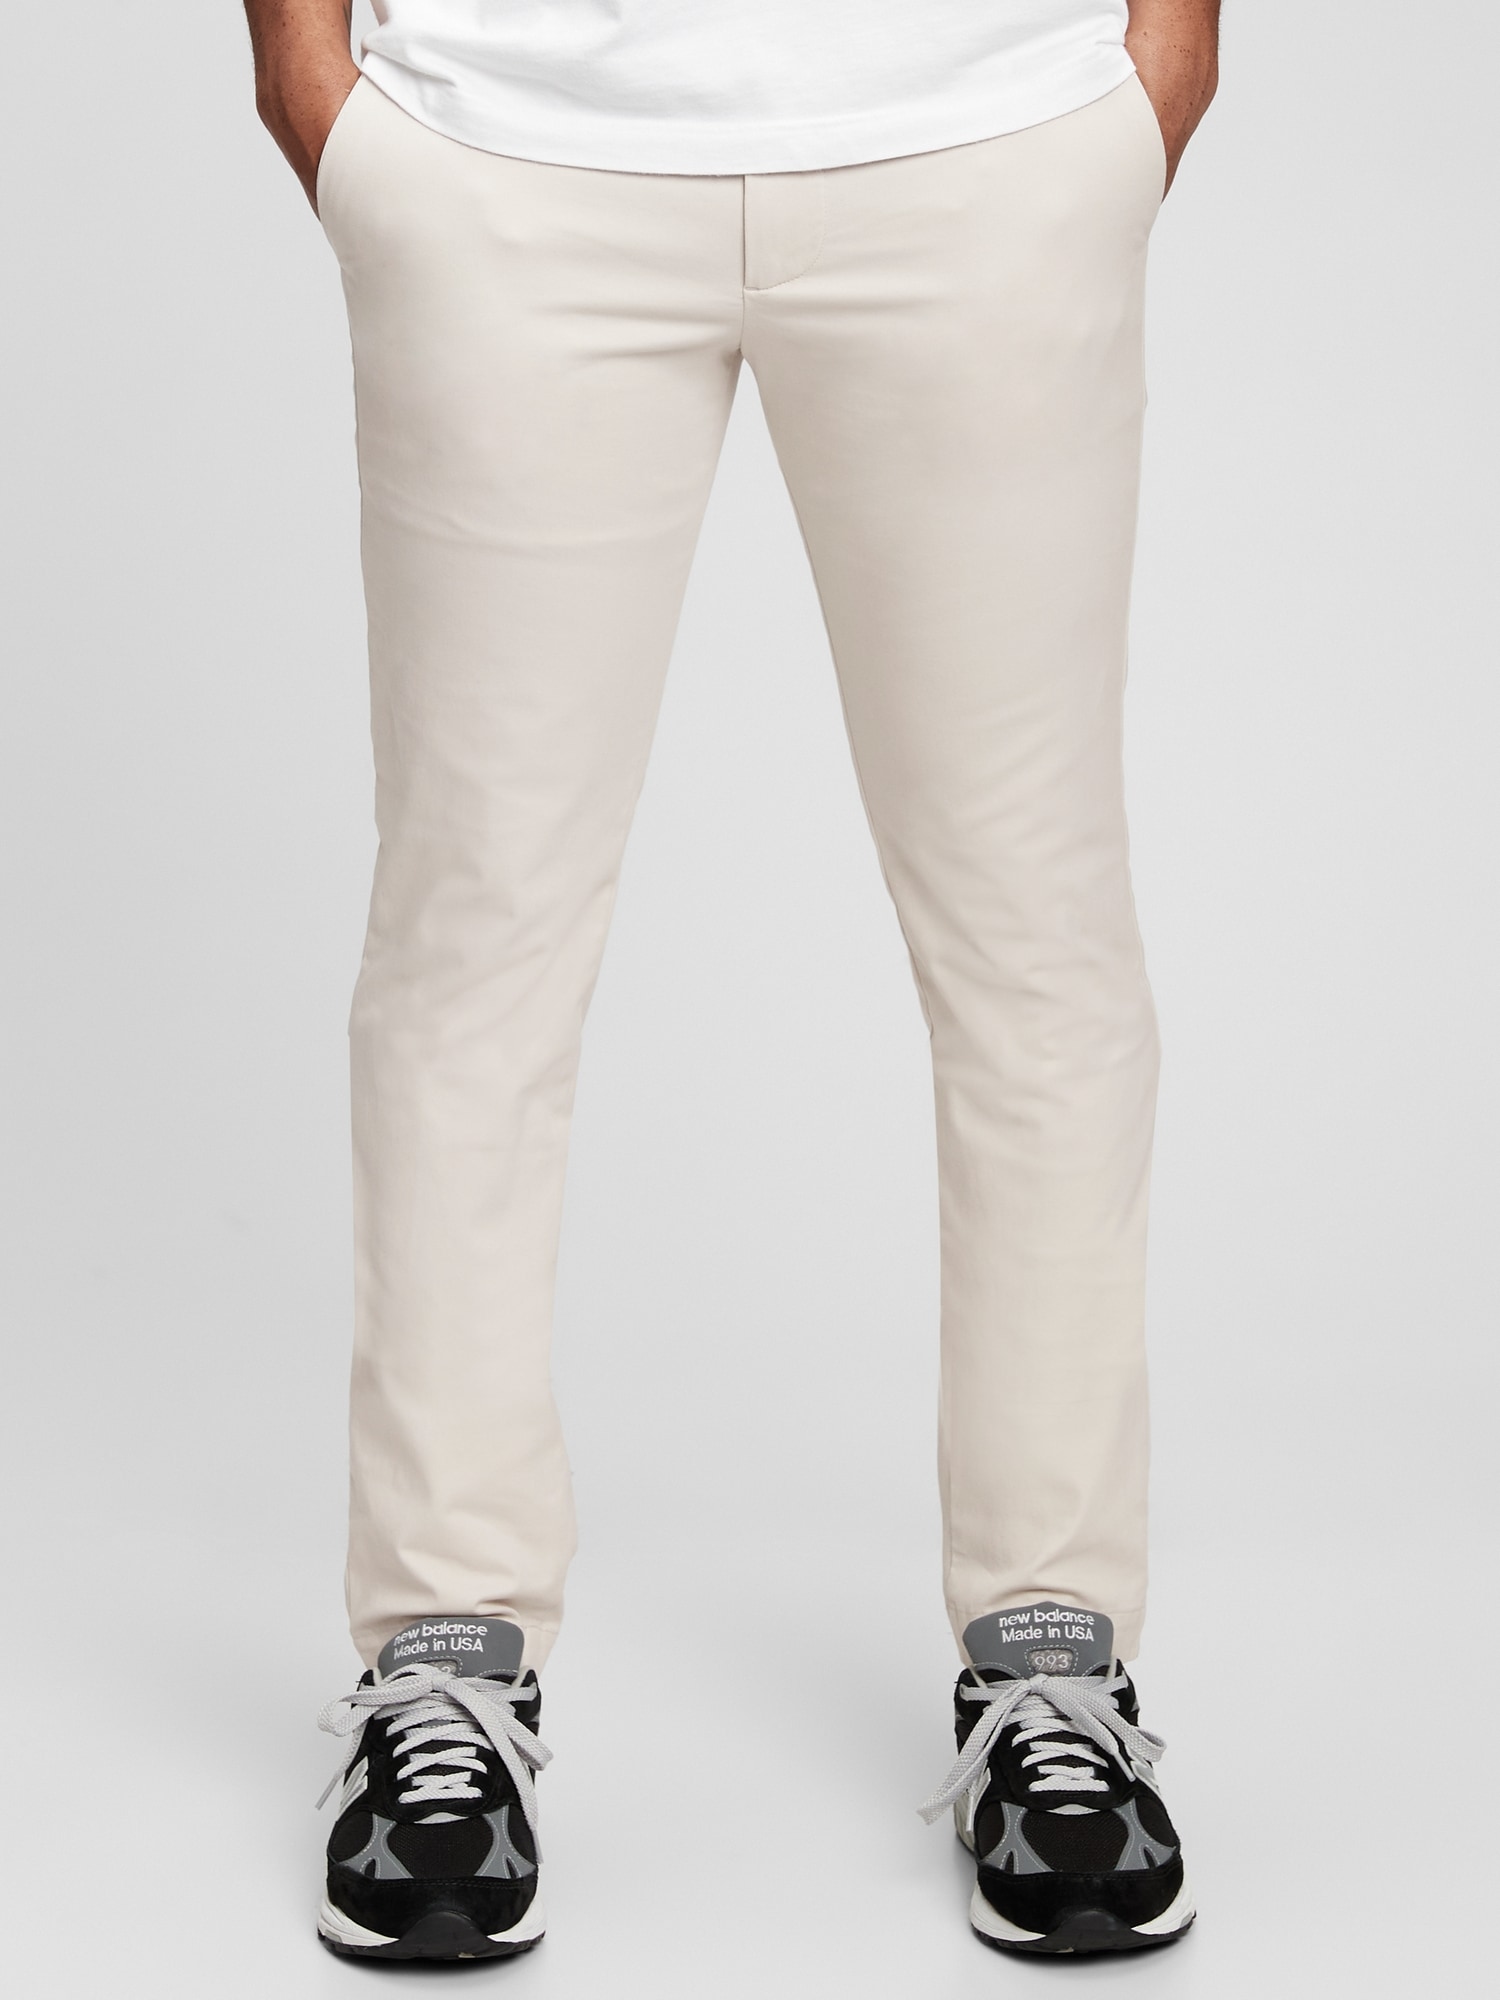 Gap Hill City Everyday Tech Pant in Slim Fit - Gem